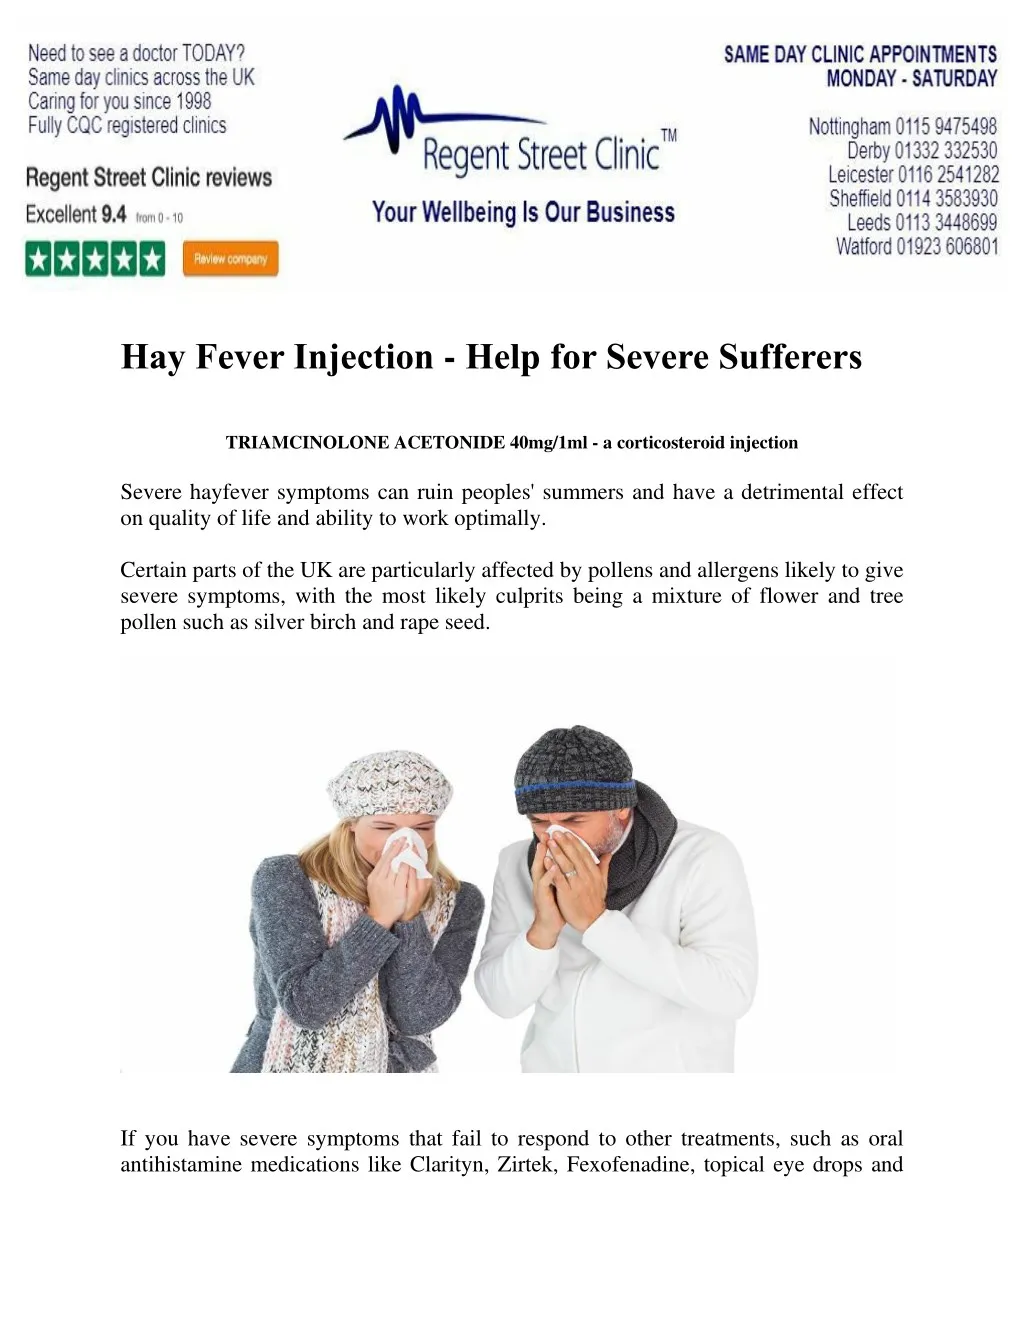 hay fever injection help for severe sufferers